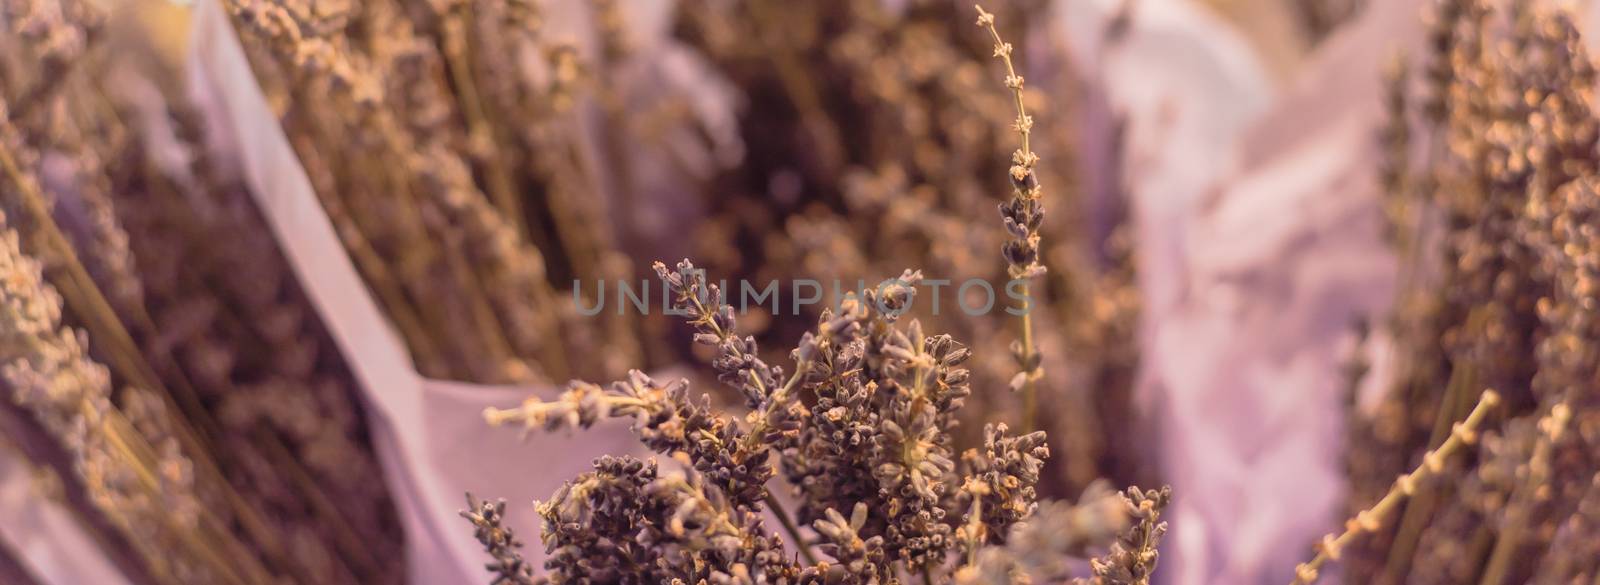 Filtered image lavender bouquet in paper wrap at local shop in Texas, USA by trongnguyen